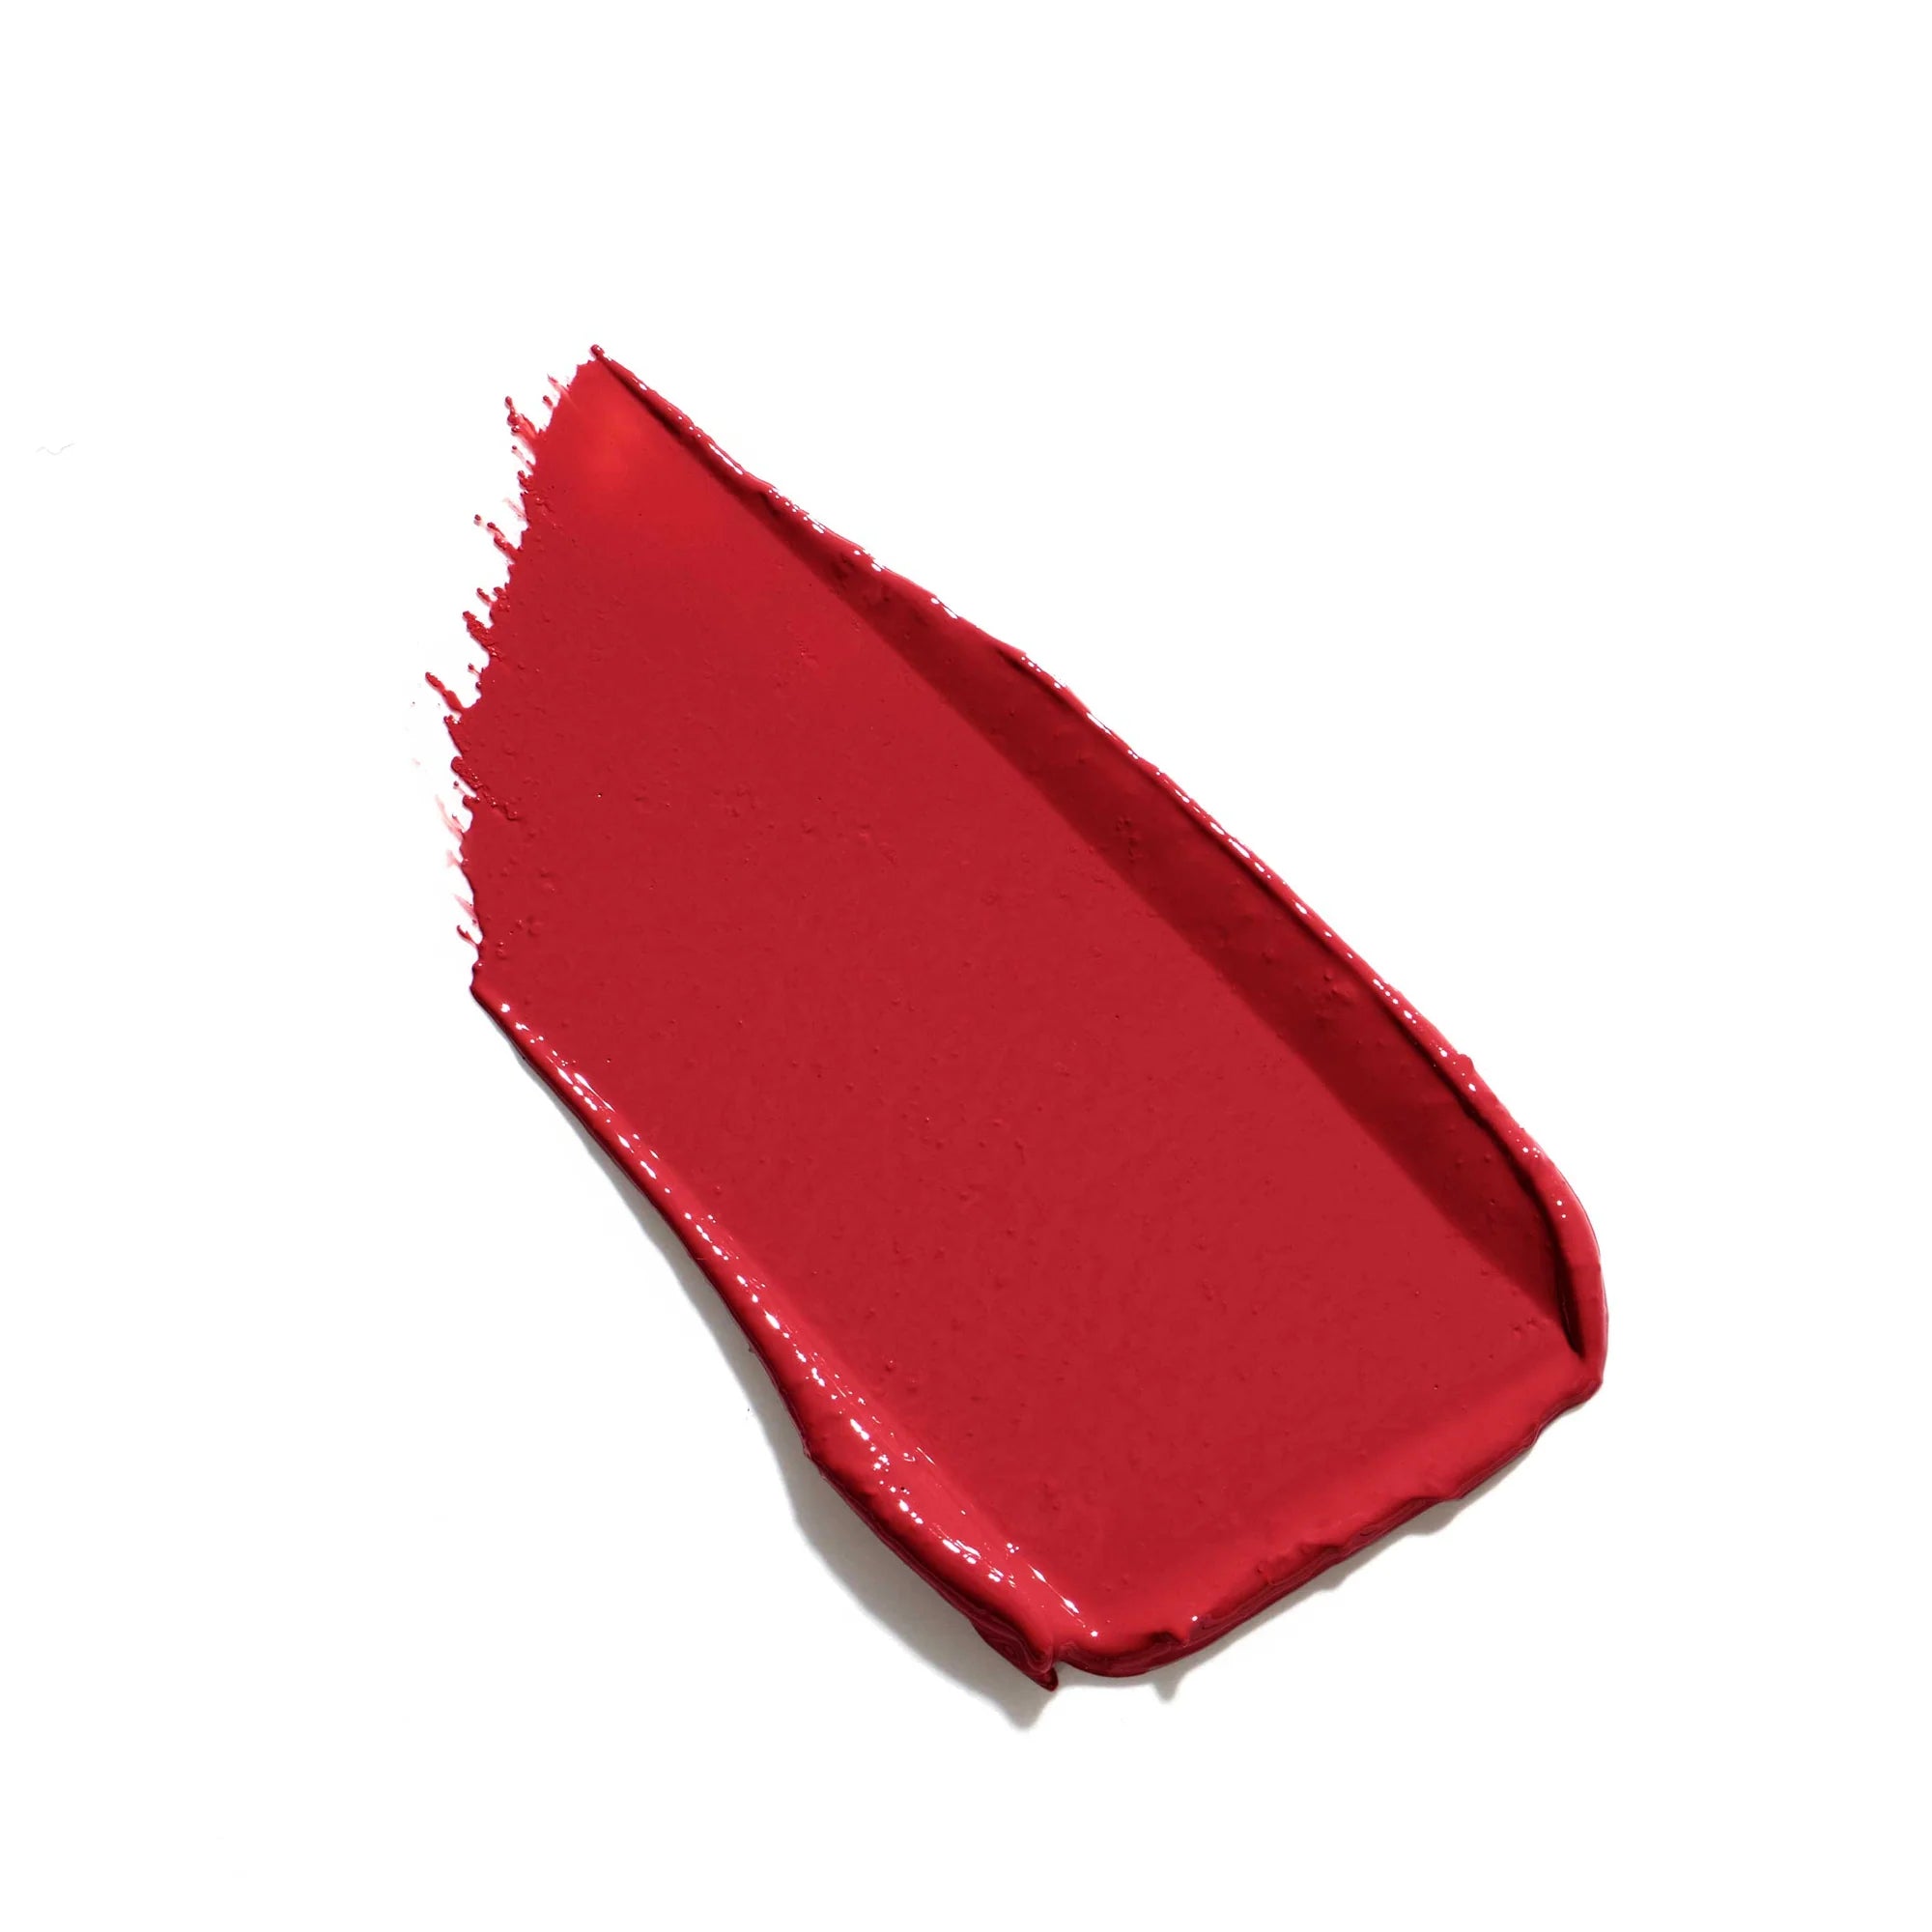 Jane Iredale's ColorLuxe Hydrating Cream Lipstick - swatch and color Candy Apple - cool medium-dark red